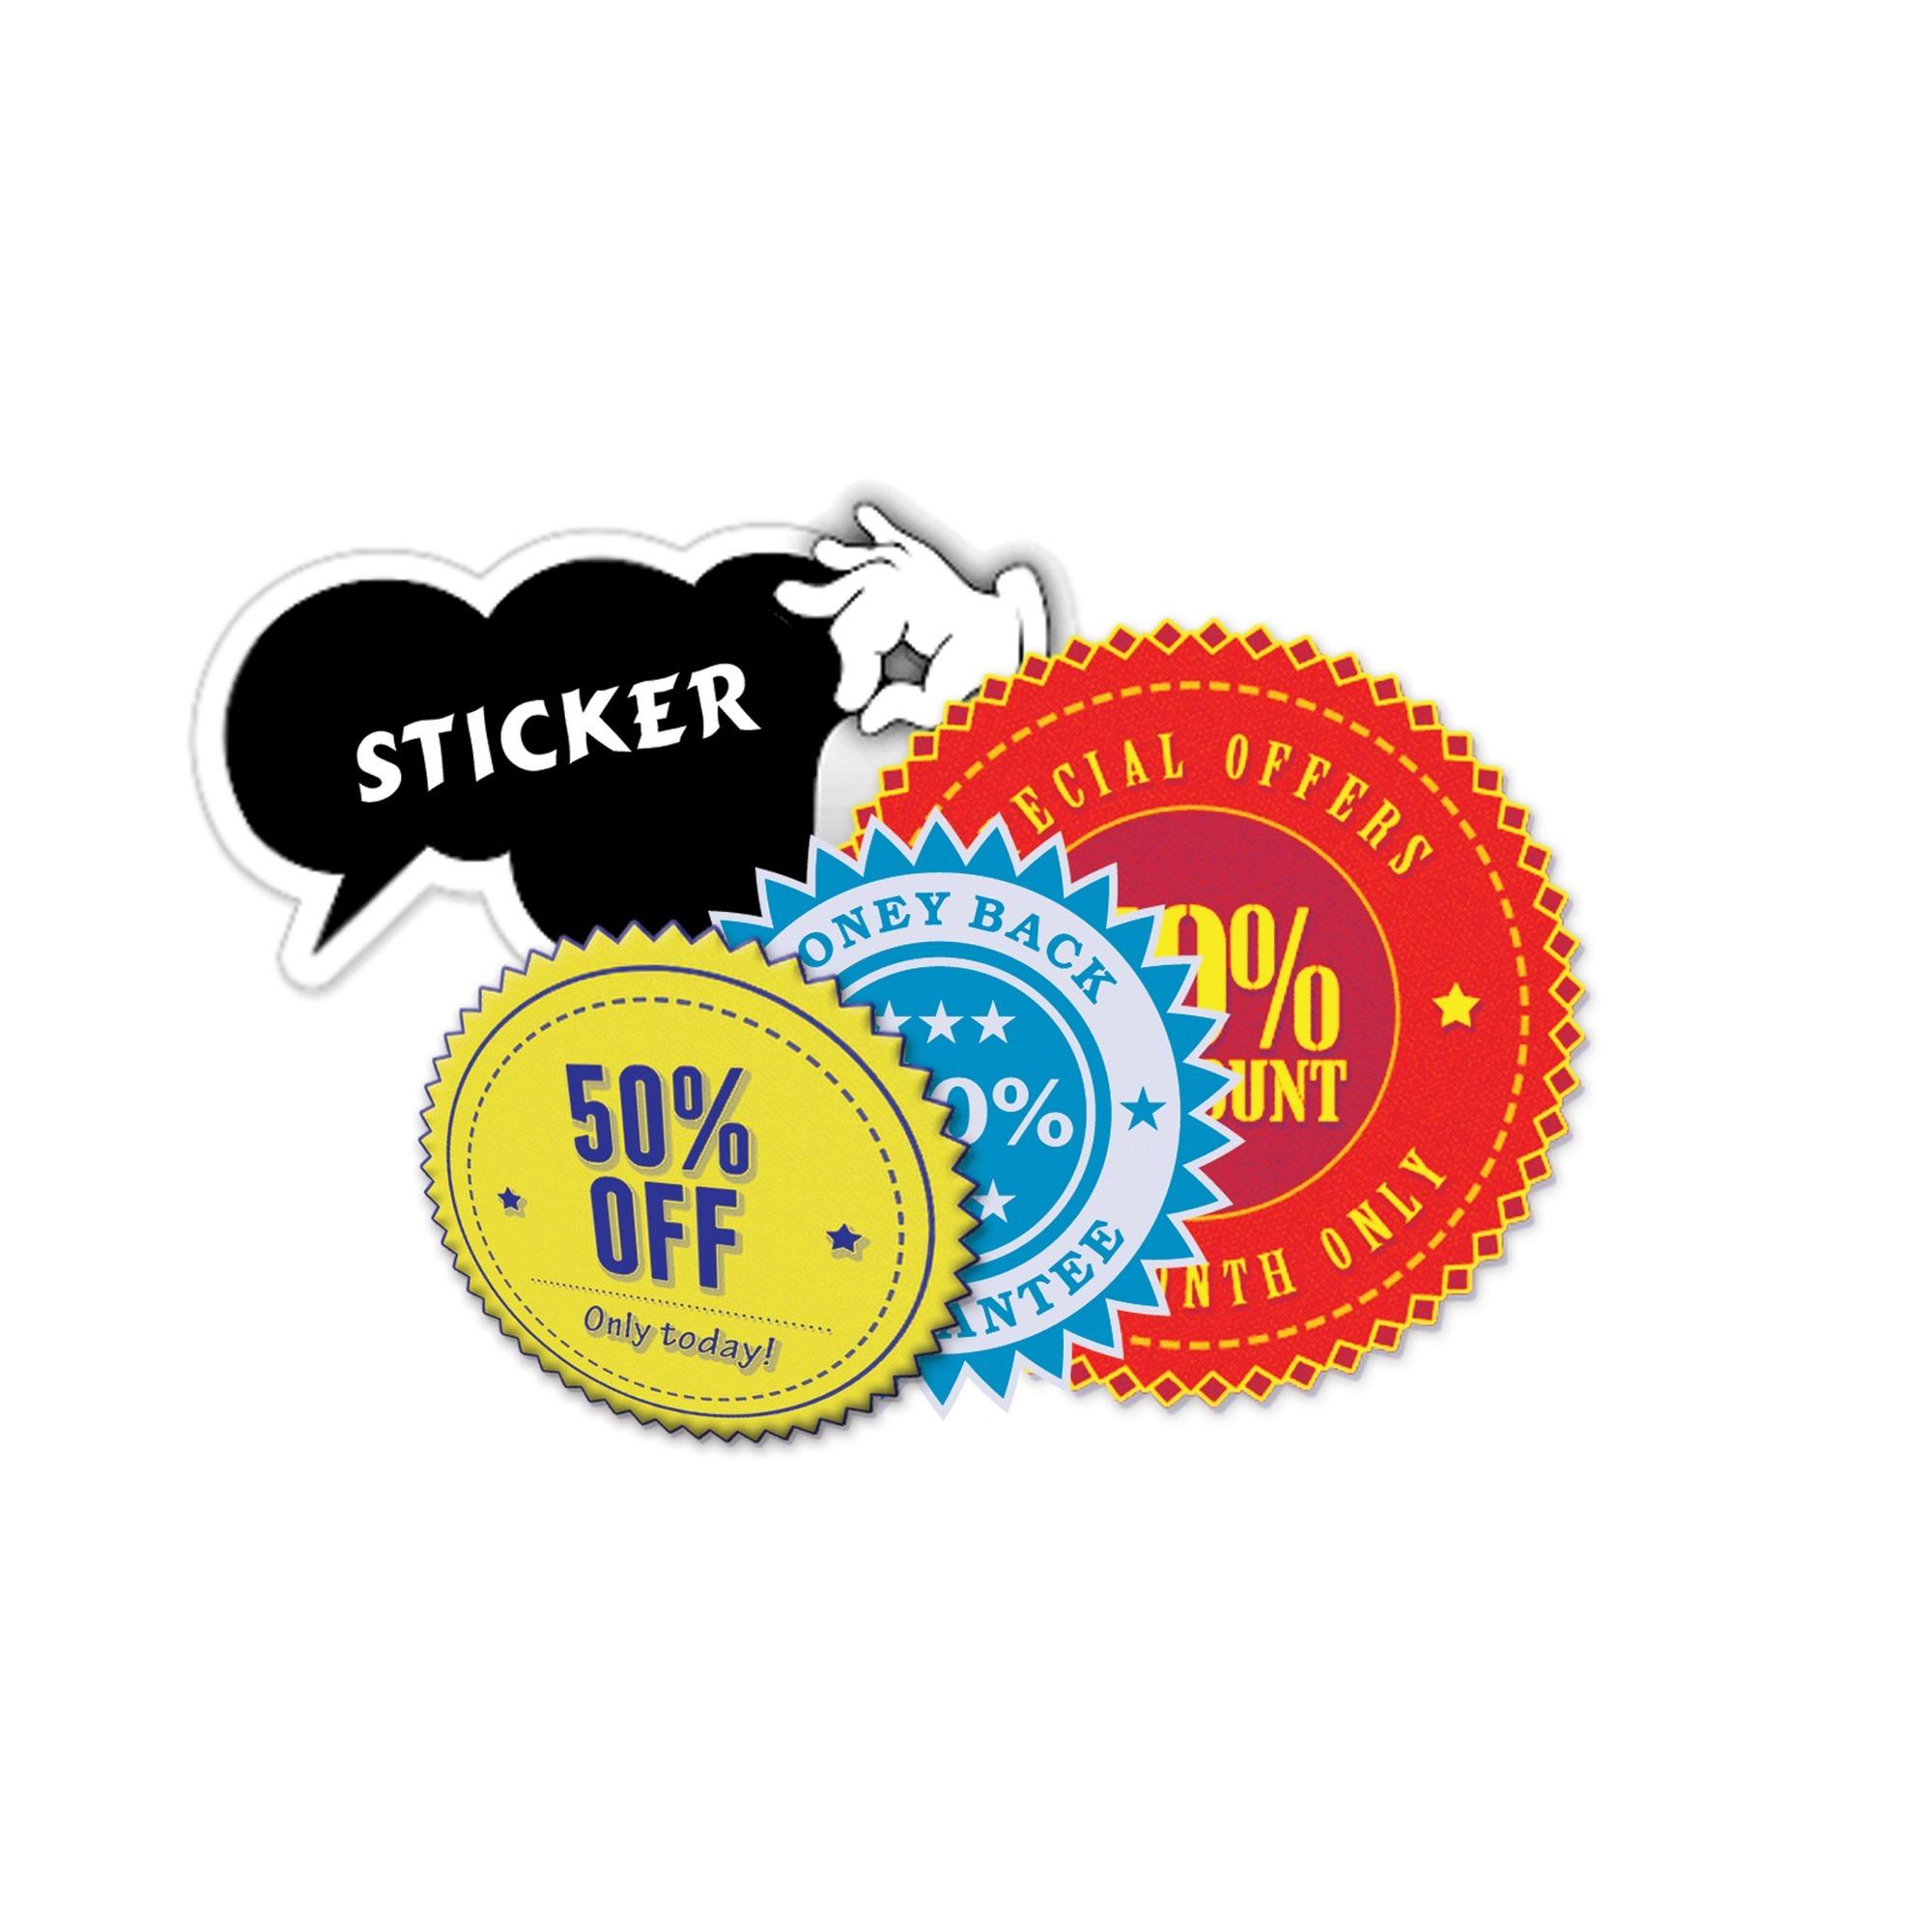 Want To Know a Secret to Be Cheap and Effective Marketing? Go For Sticky Labels: